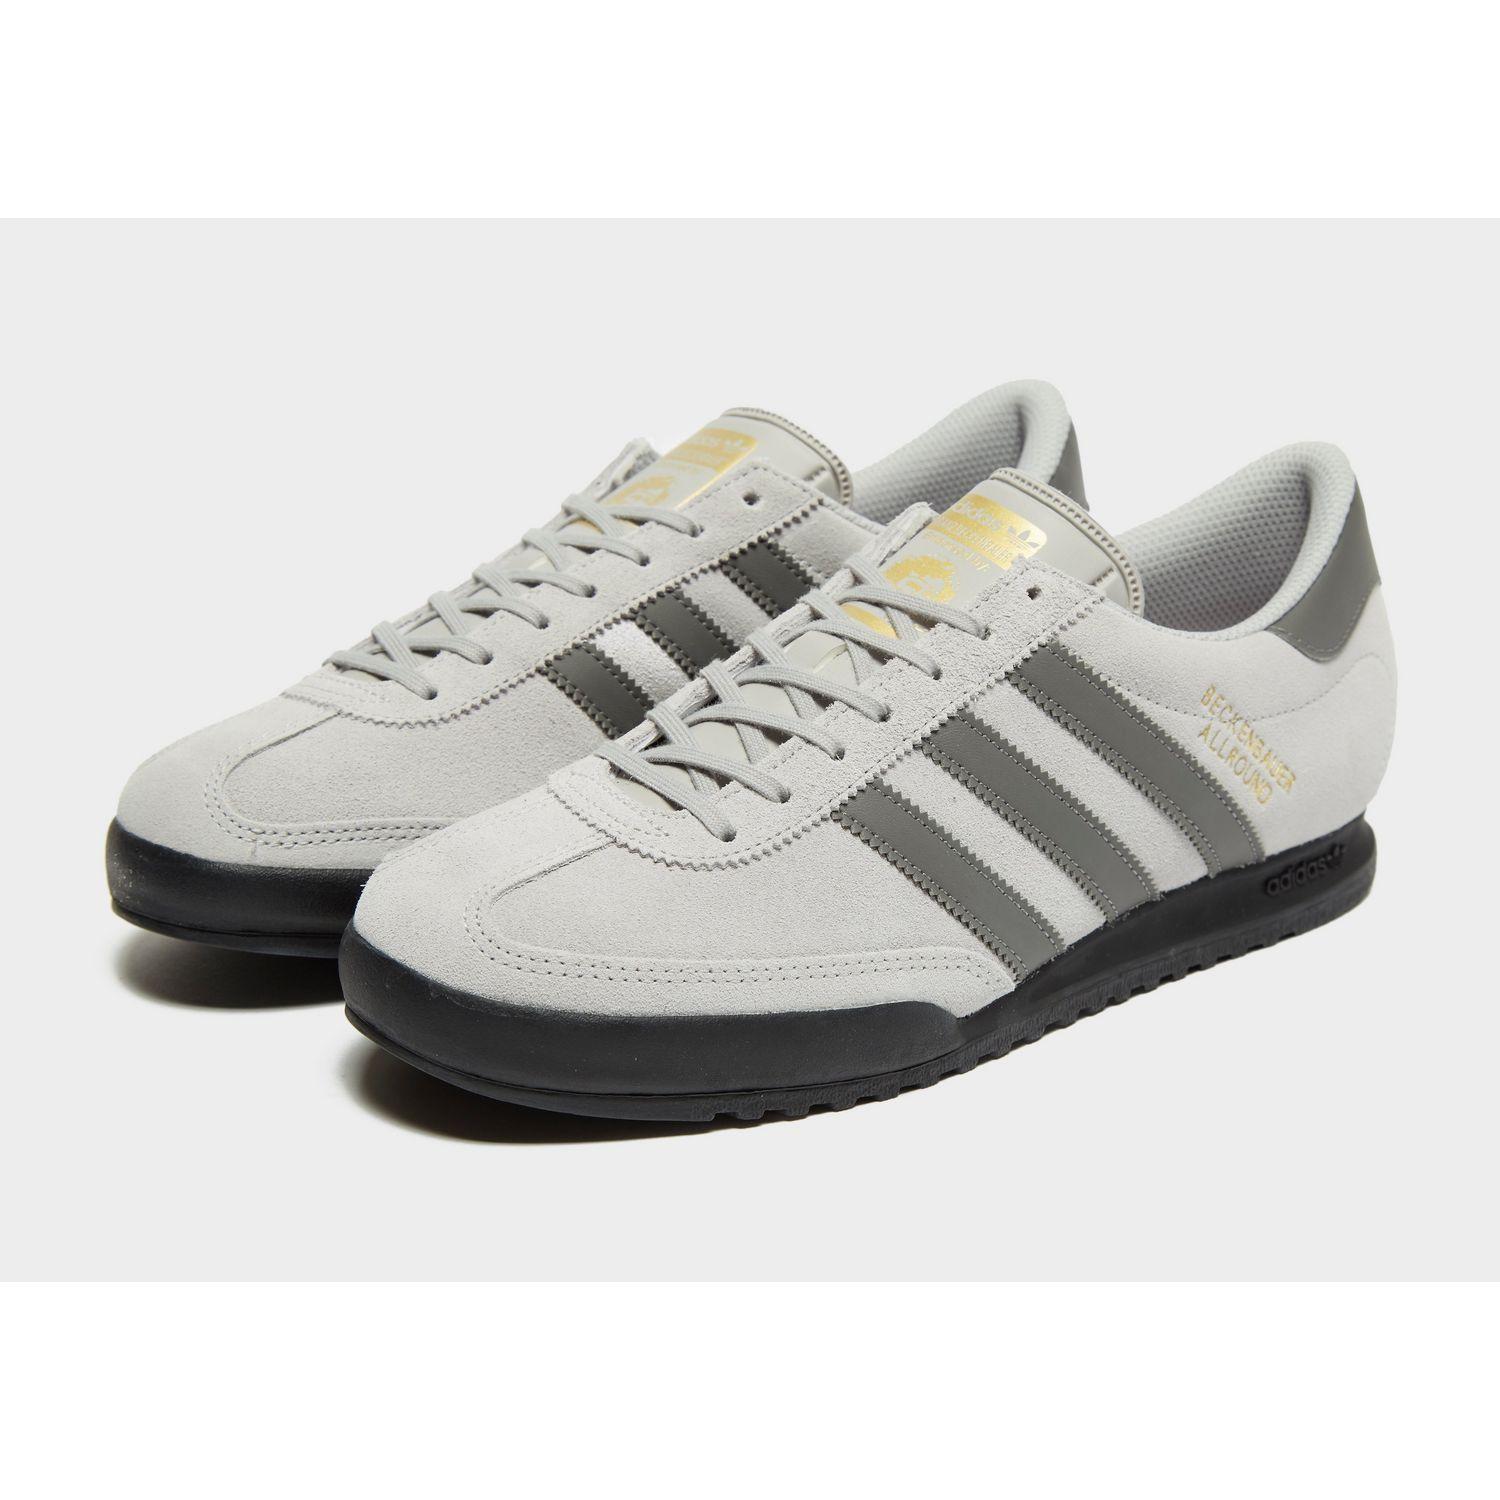 adidas beckenbauer trainers Online Shopping for Women, Men, Kids Fashion &  Lifestyle|Free Delivery & Returns! -